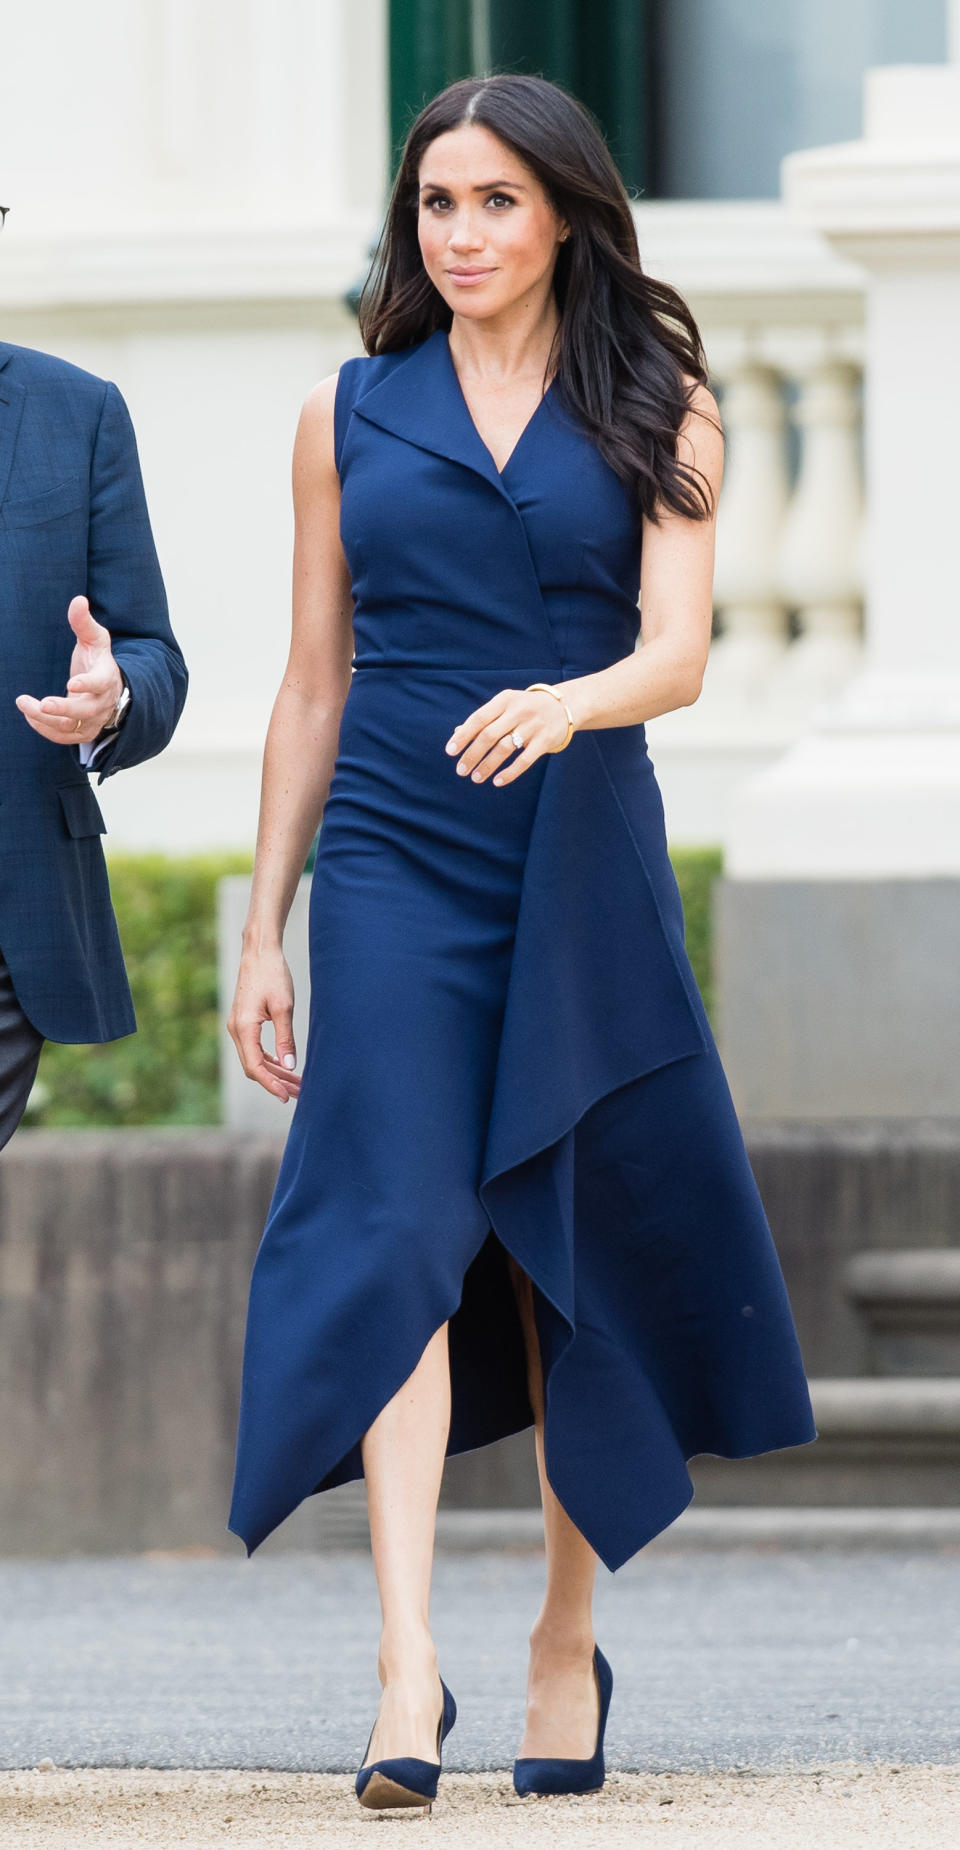 The duchess wears a <a href="https://global.dionlee.com/shop/dion-lee/new-/folded-sail-dress-a9564-p19/281031" target="_blank" rel="noopener noreferrer">Dion Lee dress</a> on Oct. 18, day three of the royal tour. The dress, which costs $990, is currently available for preorder.